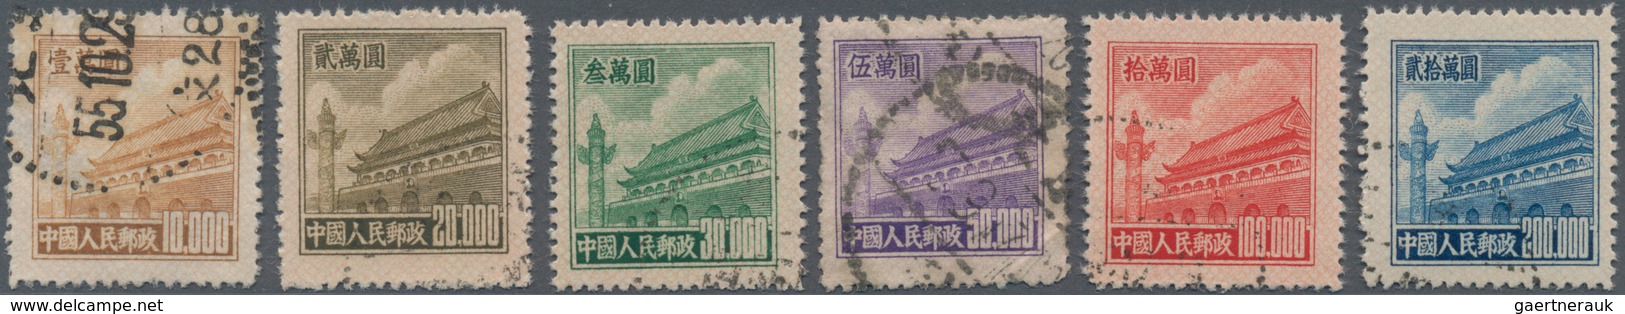 China - Volksrepublik: 1951, Tiananmen Difinitives (R5), Set Of 6, Used, Michel 100 ($10,000) Thinne - Lettres & Documents